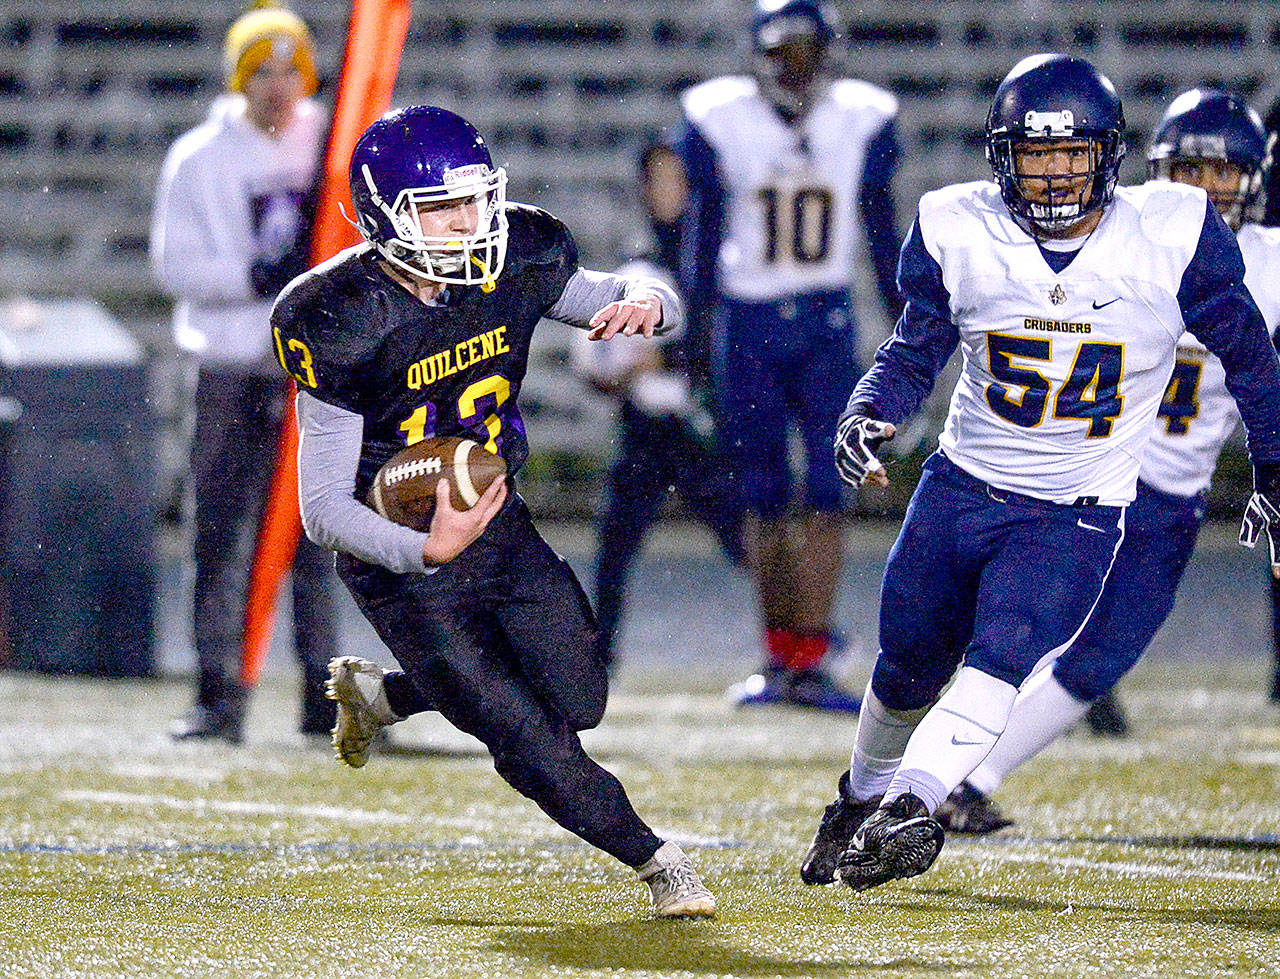 Quilcene running back Olin Reynolds(13) runs away from Tacoma Baptist’s So Ktongryoon (54) Saturday night in Poulsbo. (Jeff Halstead/for Peninsula Daily News)